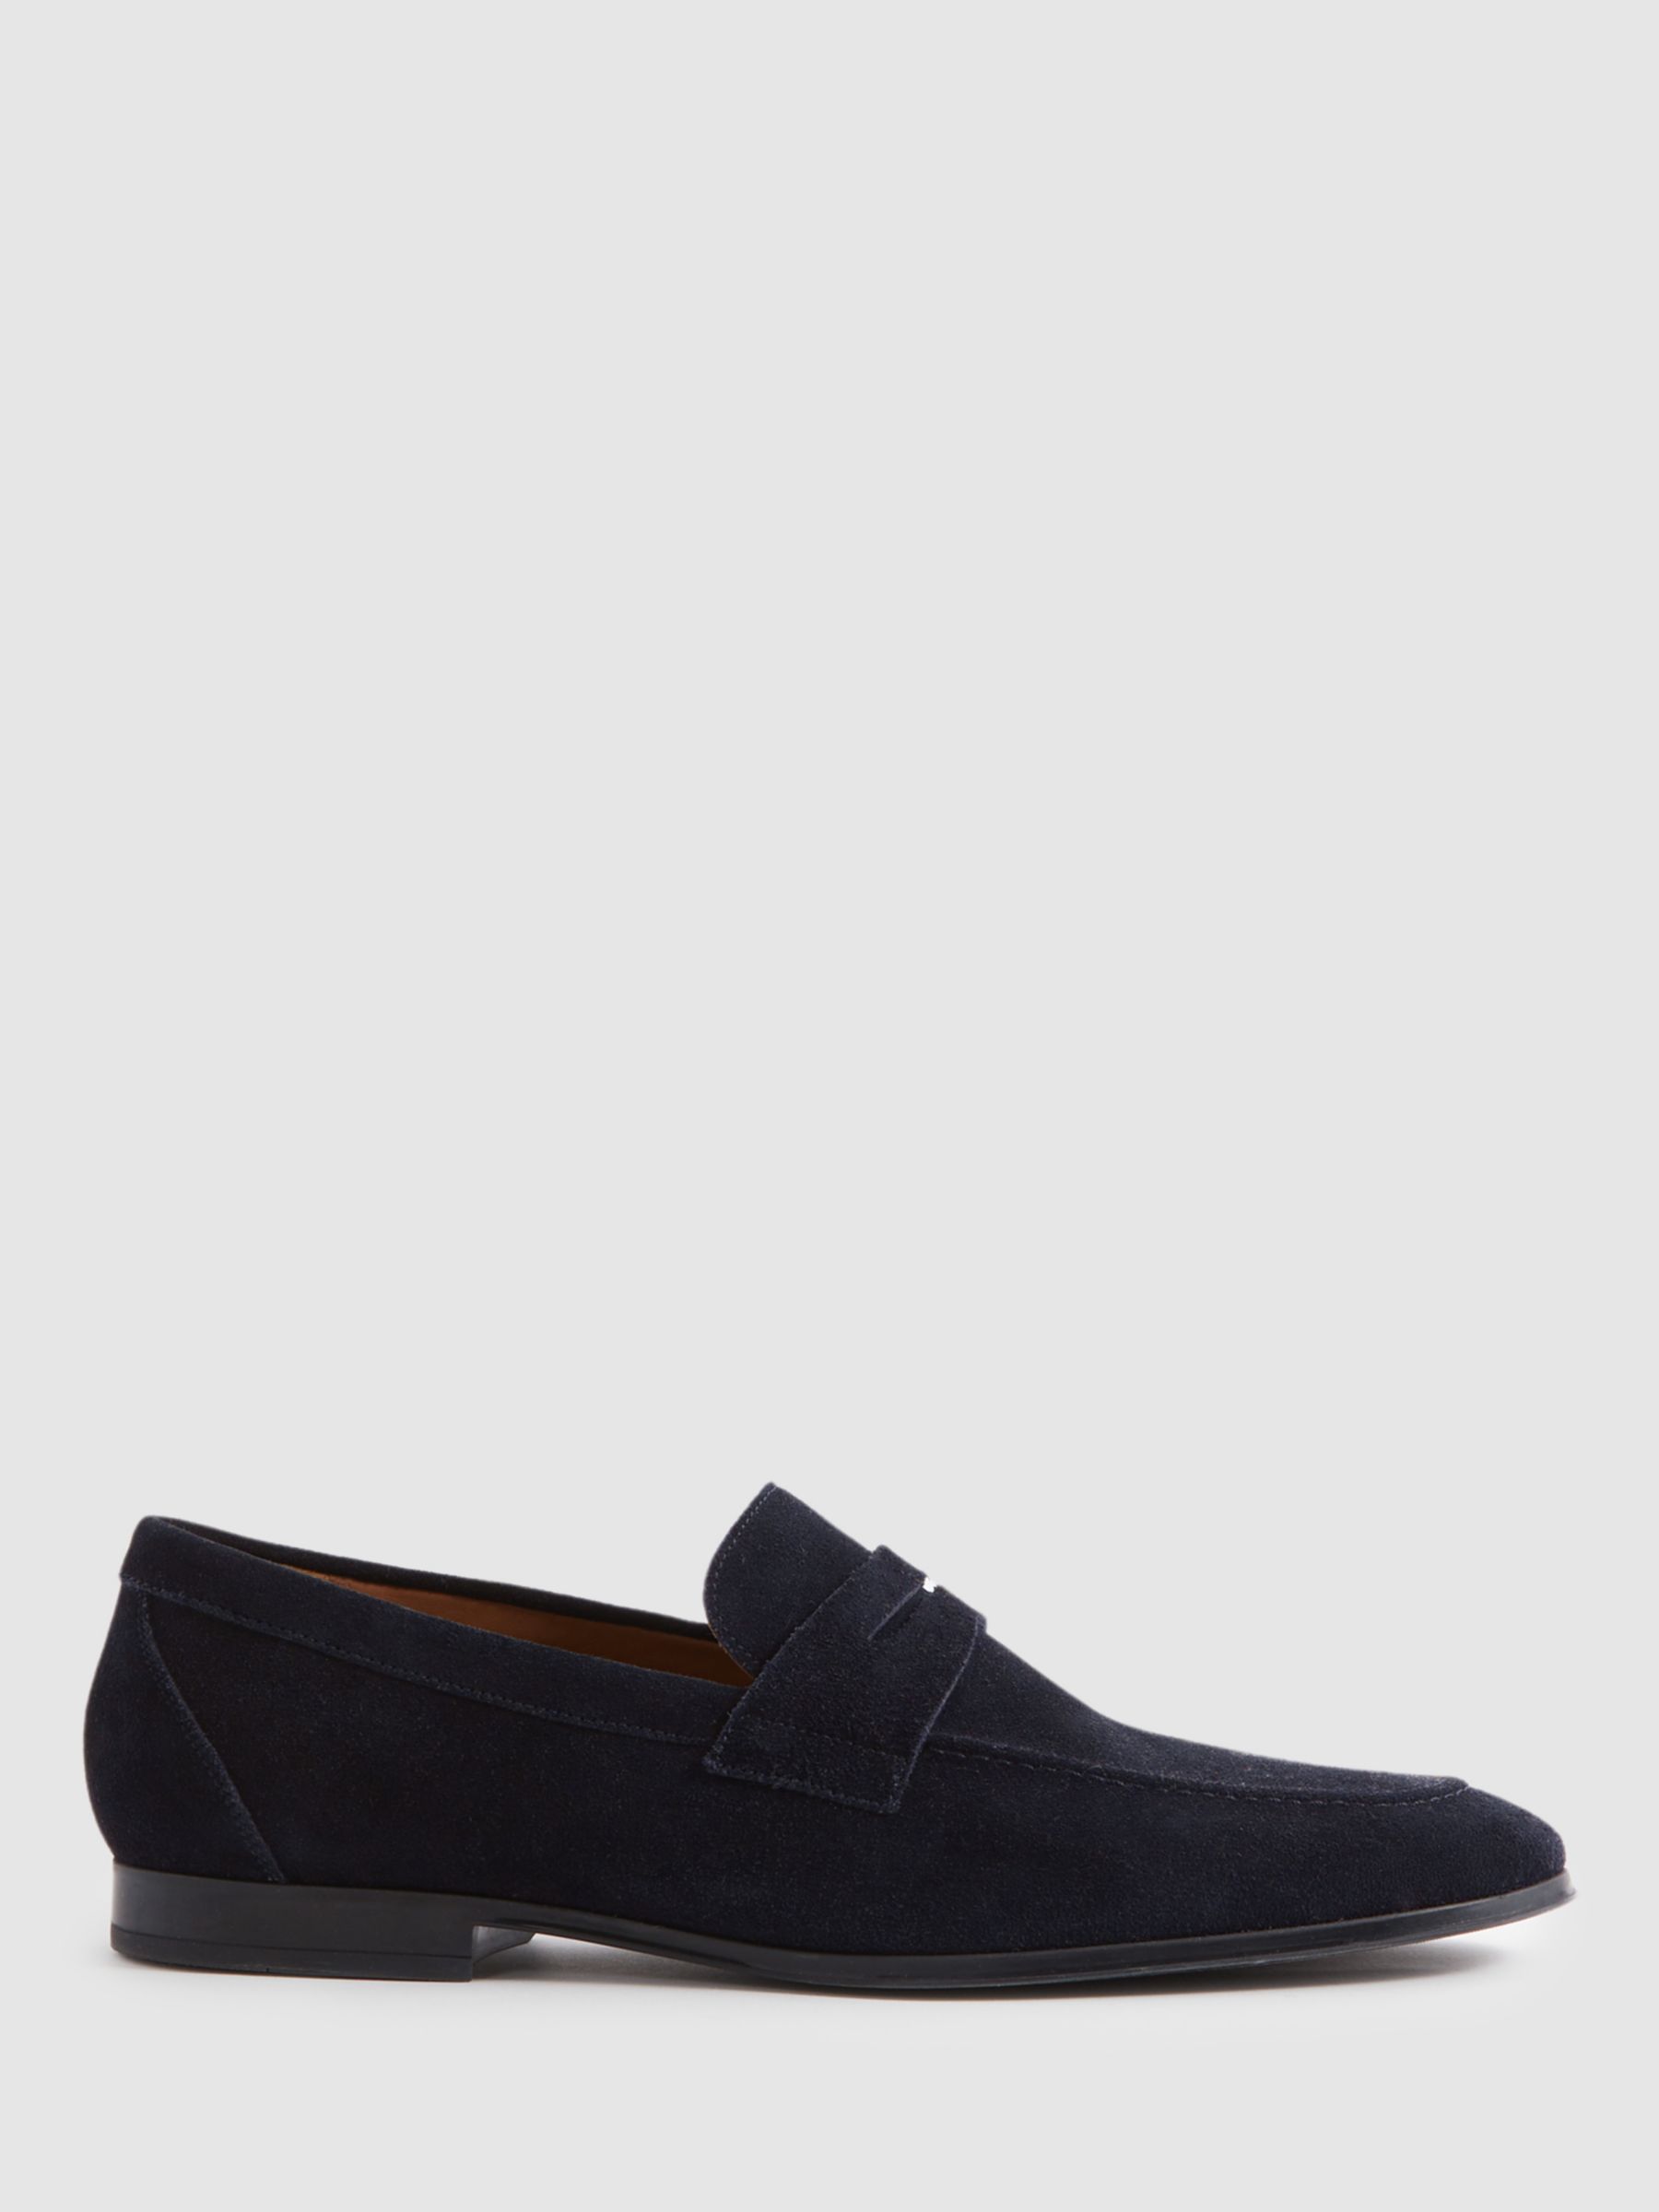 Reiss Bray Suede Loafers, Navy, 7